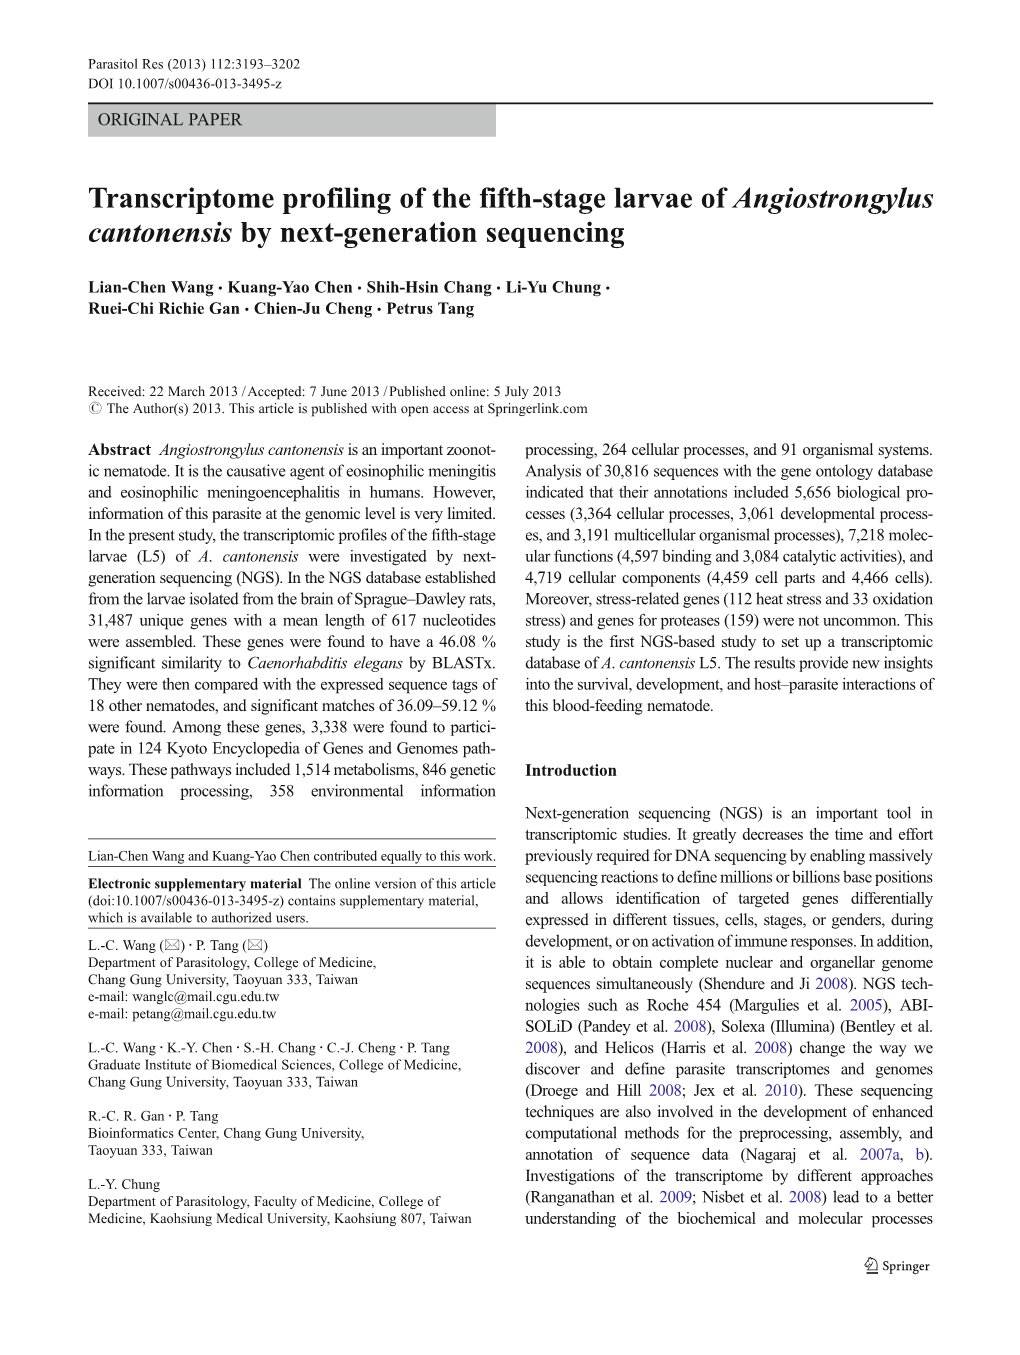 Transcriptome Profiling of the Fifth-Stage Larvae of Angiostrongylus Cantonensis by Next-Generation Sequencing